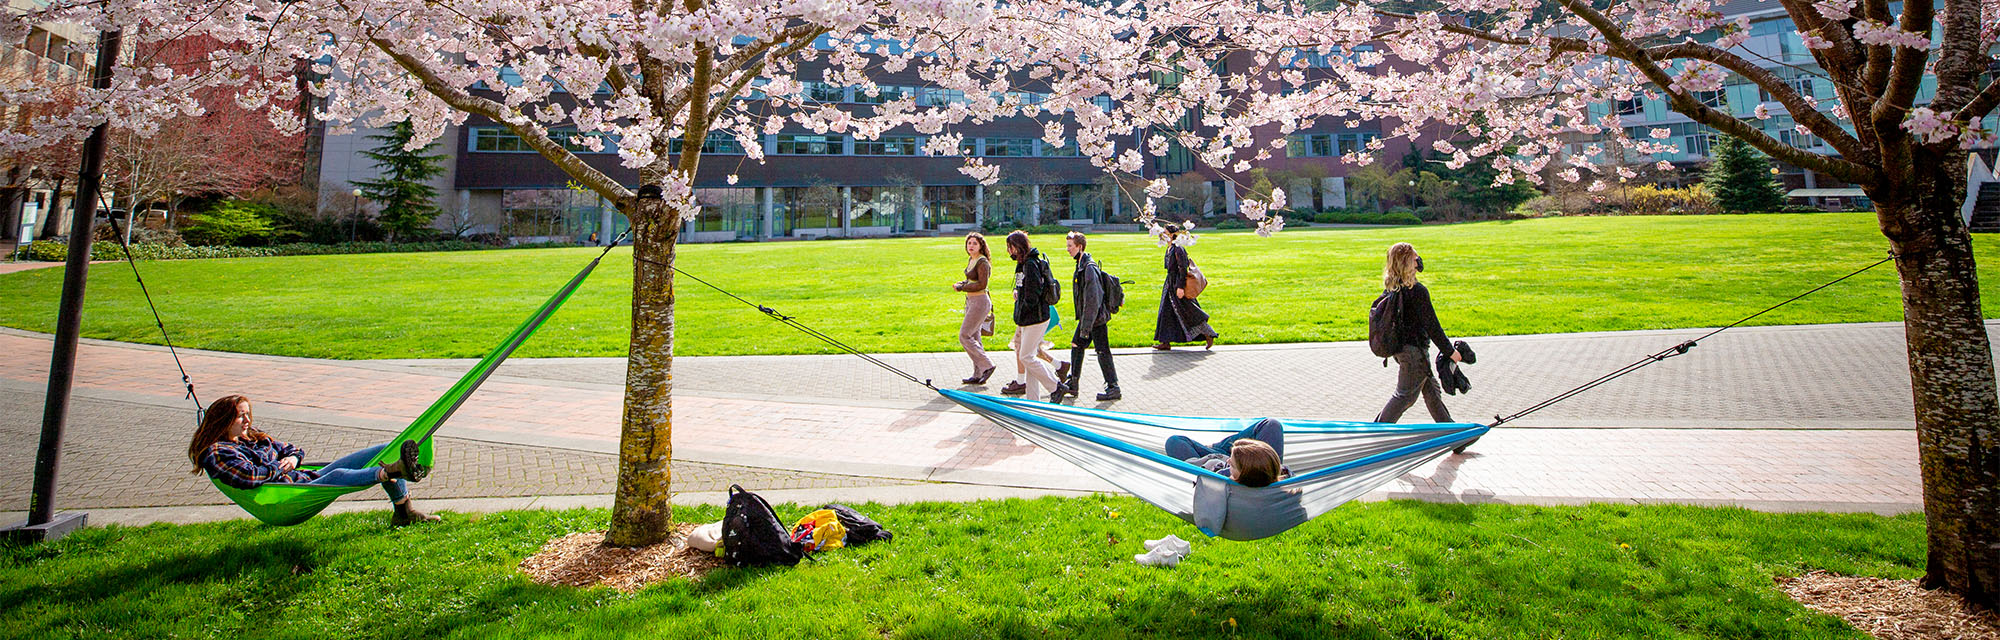 Students walking on campus in the spring. Students relax in hammocks that are strung up beneath blooming cherry trees.